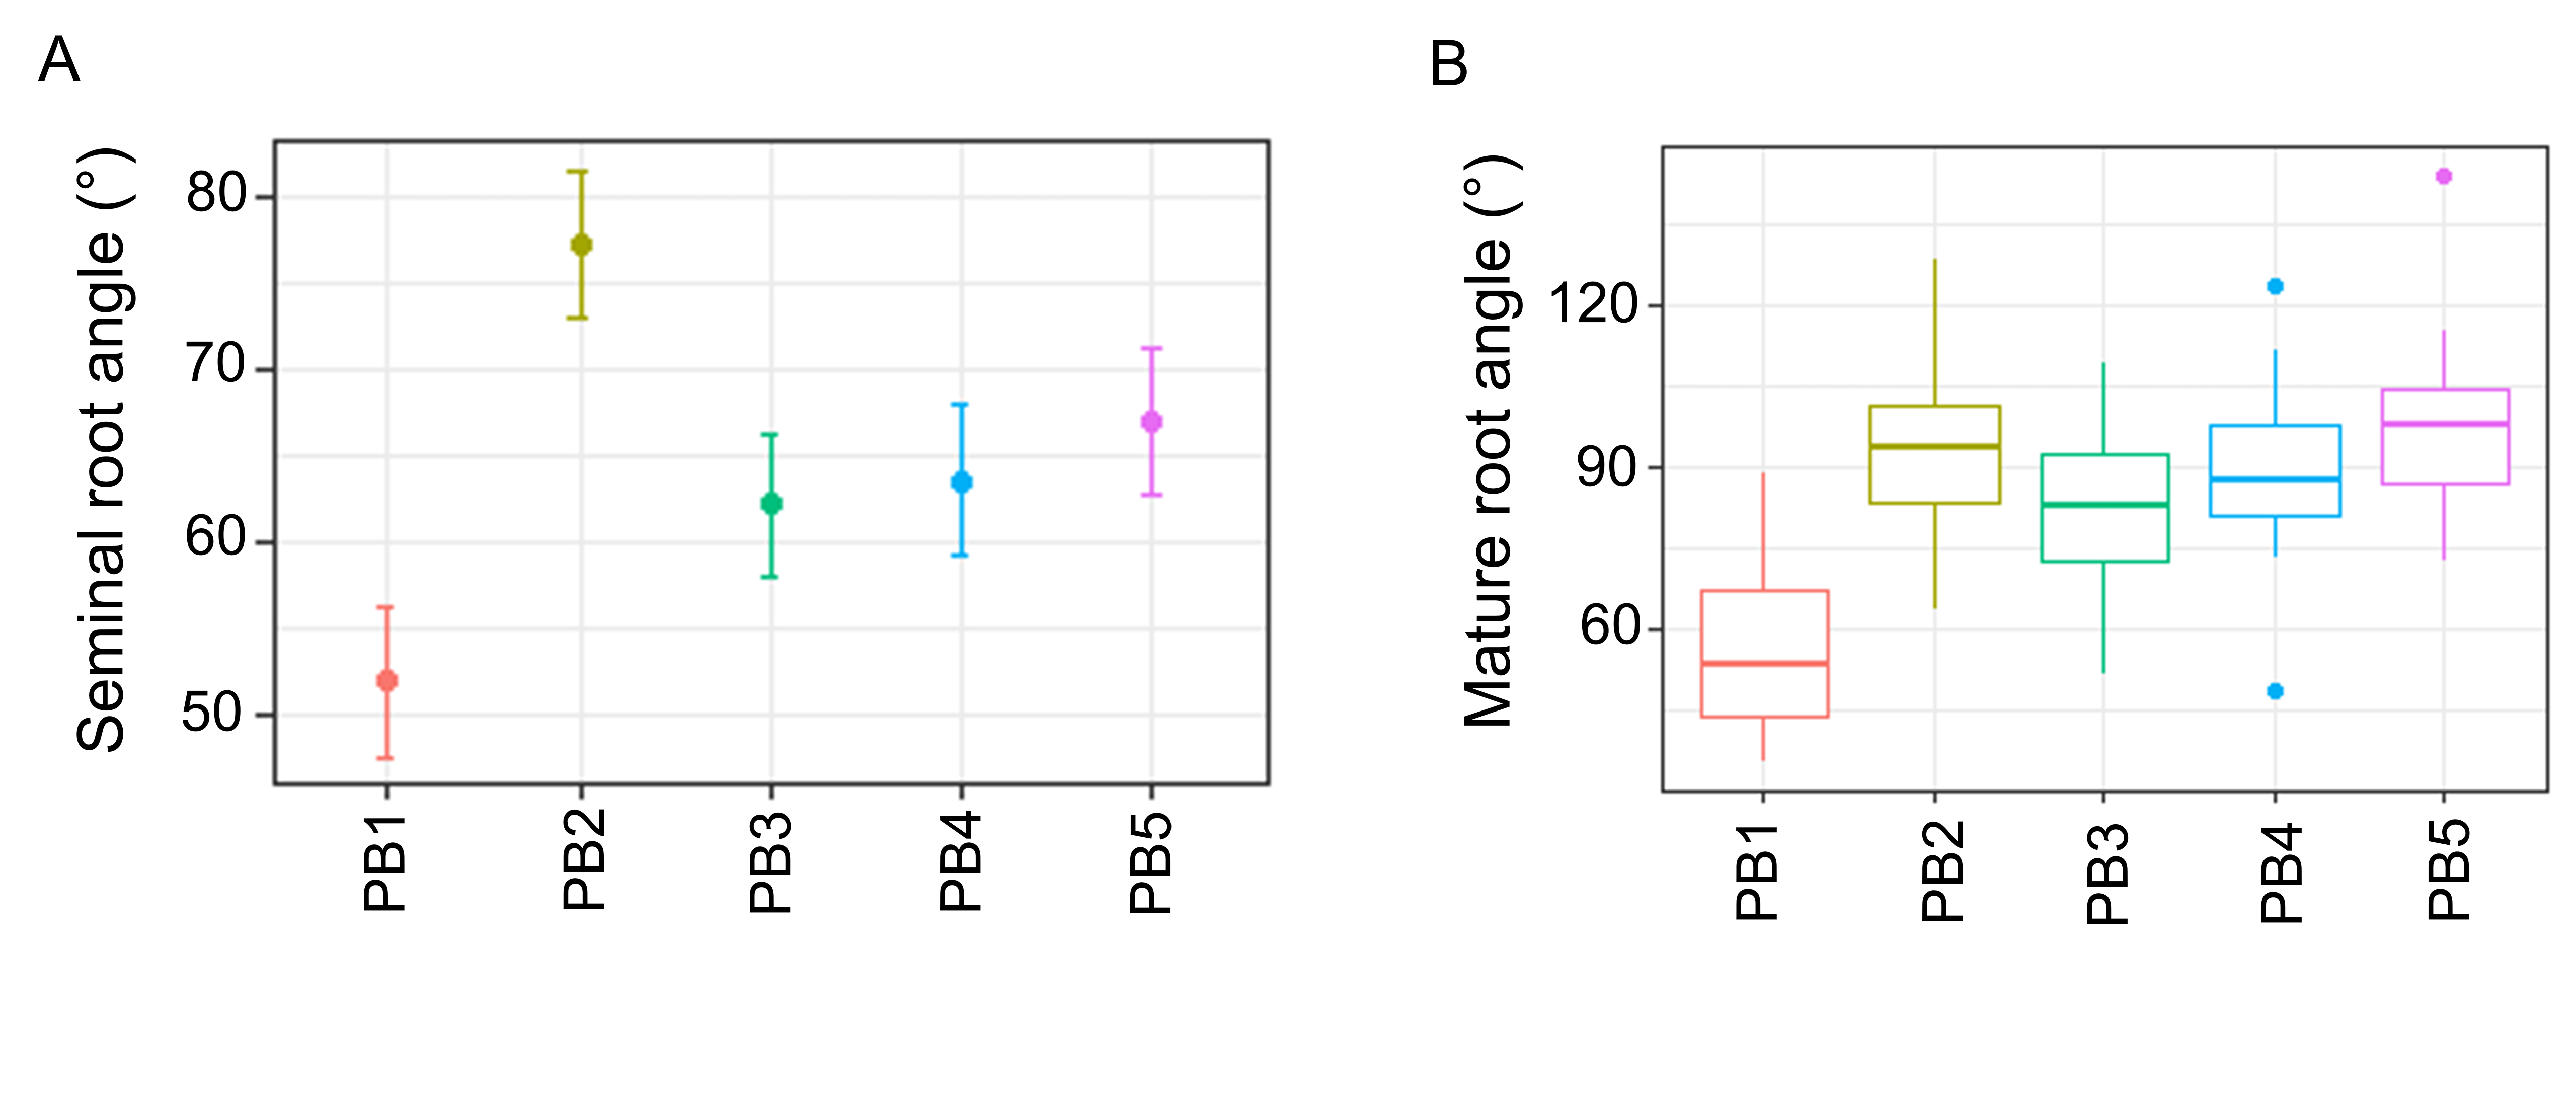 Figure 2A is a column graph that shows seminal root angle BLUPs measured using the ‘clear pot’ method, where error bars represent the standard error of the mean. Figure 2B  shows box-and-whisker plots displaying the full distribution of data for mature root angle measured using the ‘shovelomics’ methods. Adapted from Voss-Fels and Robinson et al. 2017.